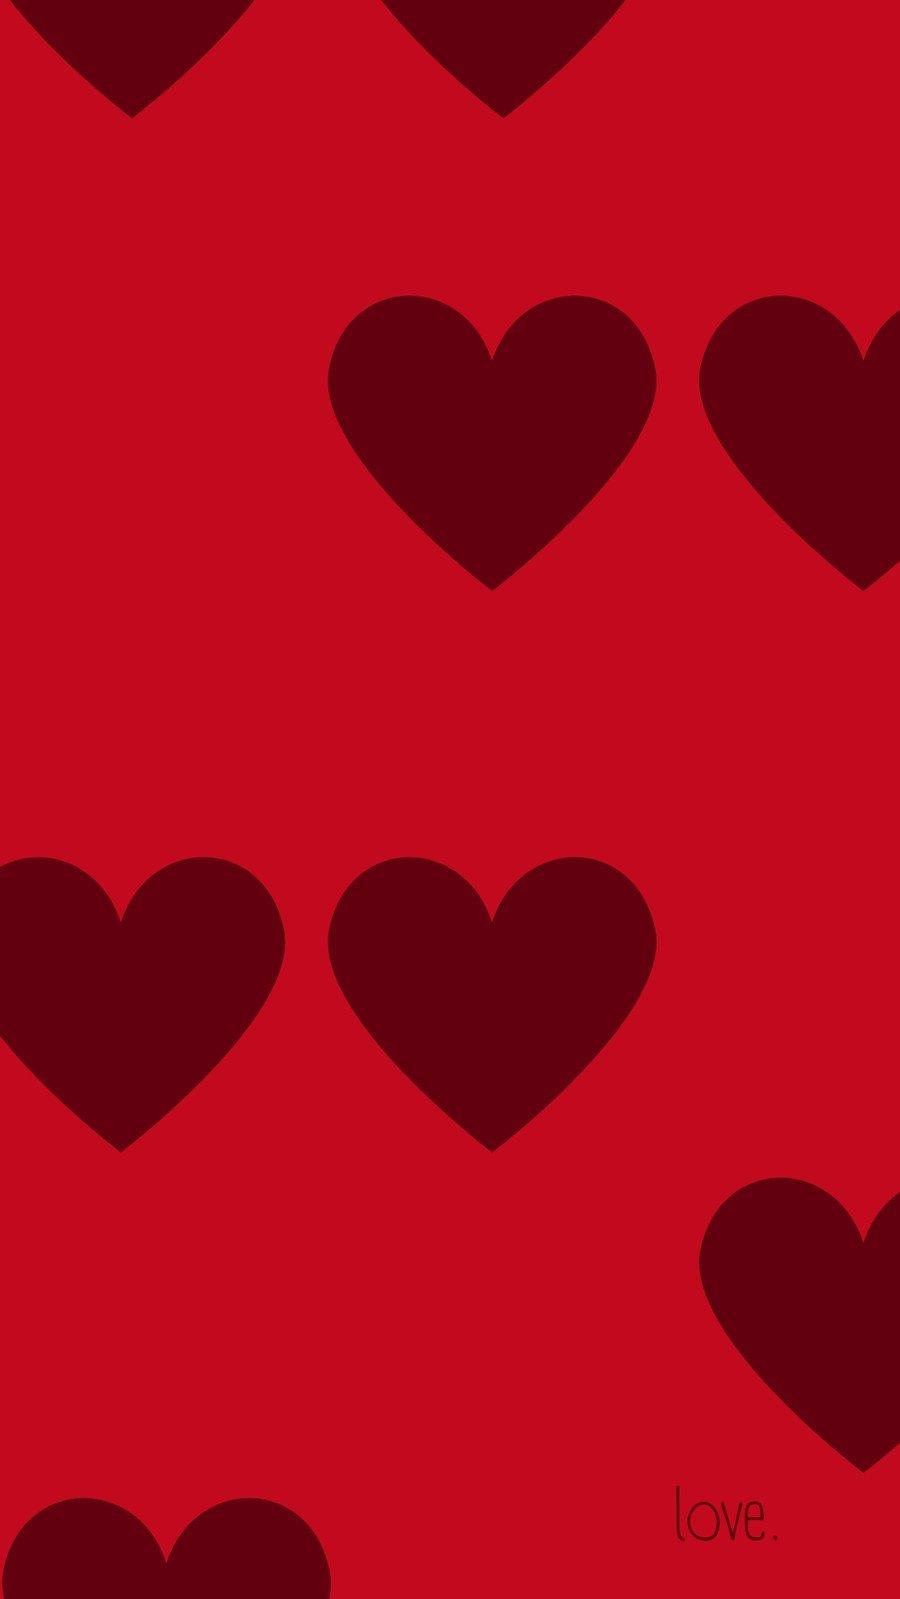 And Customizable Heart Wallpaper Templates